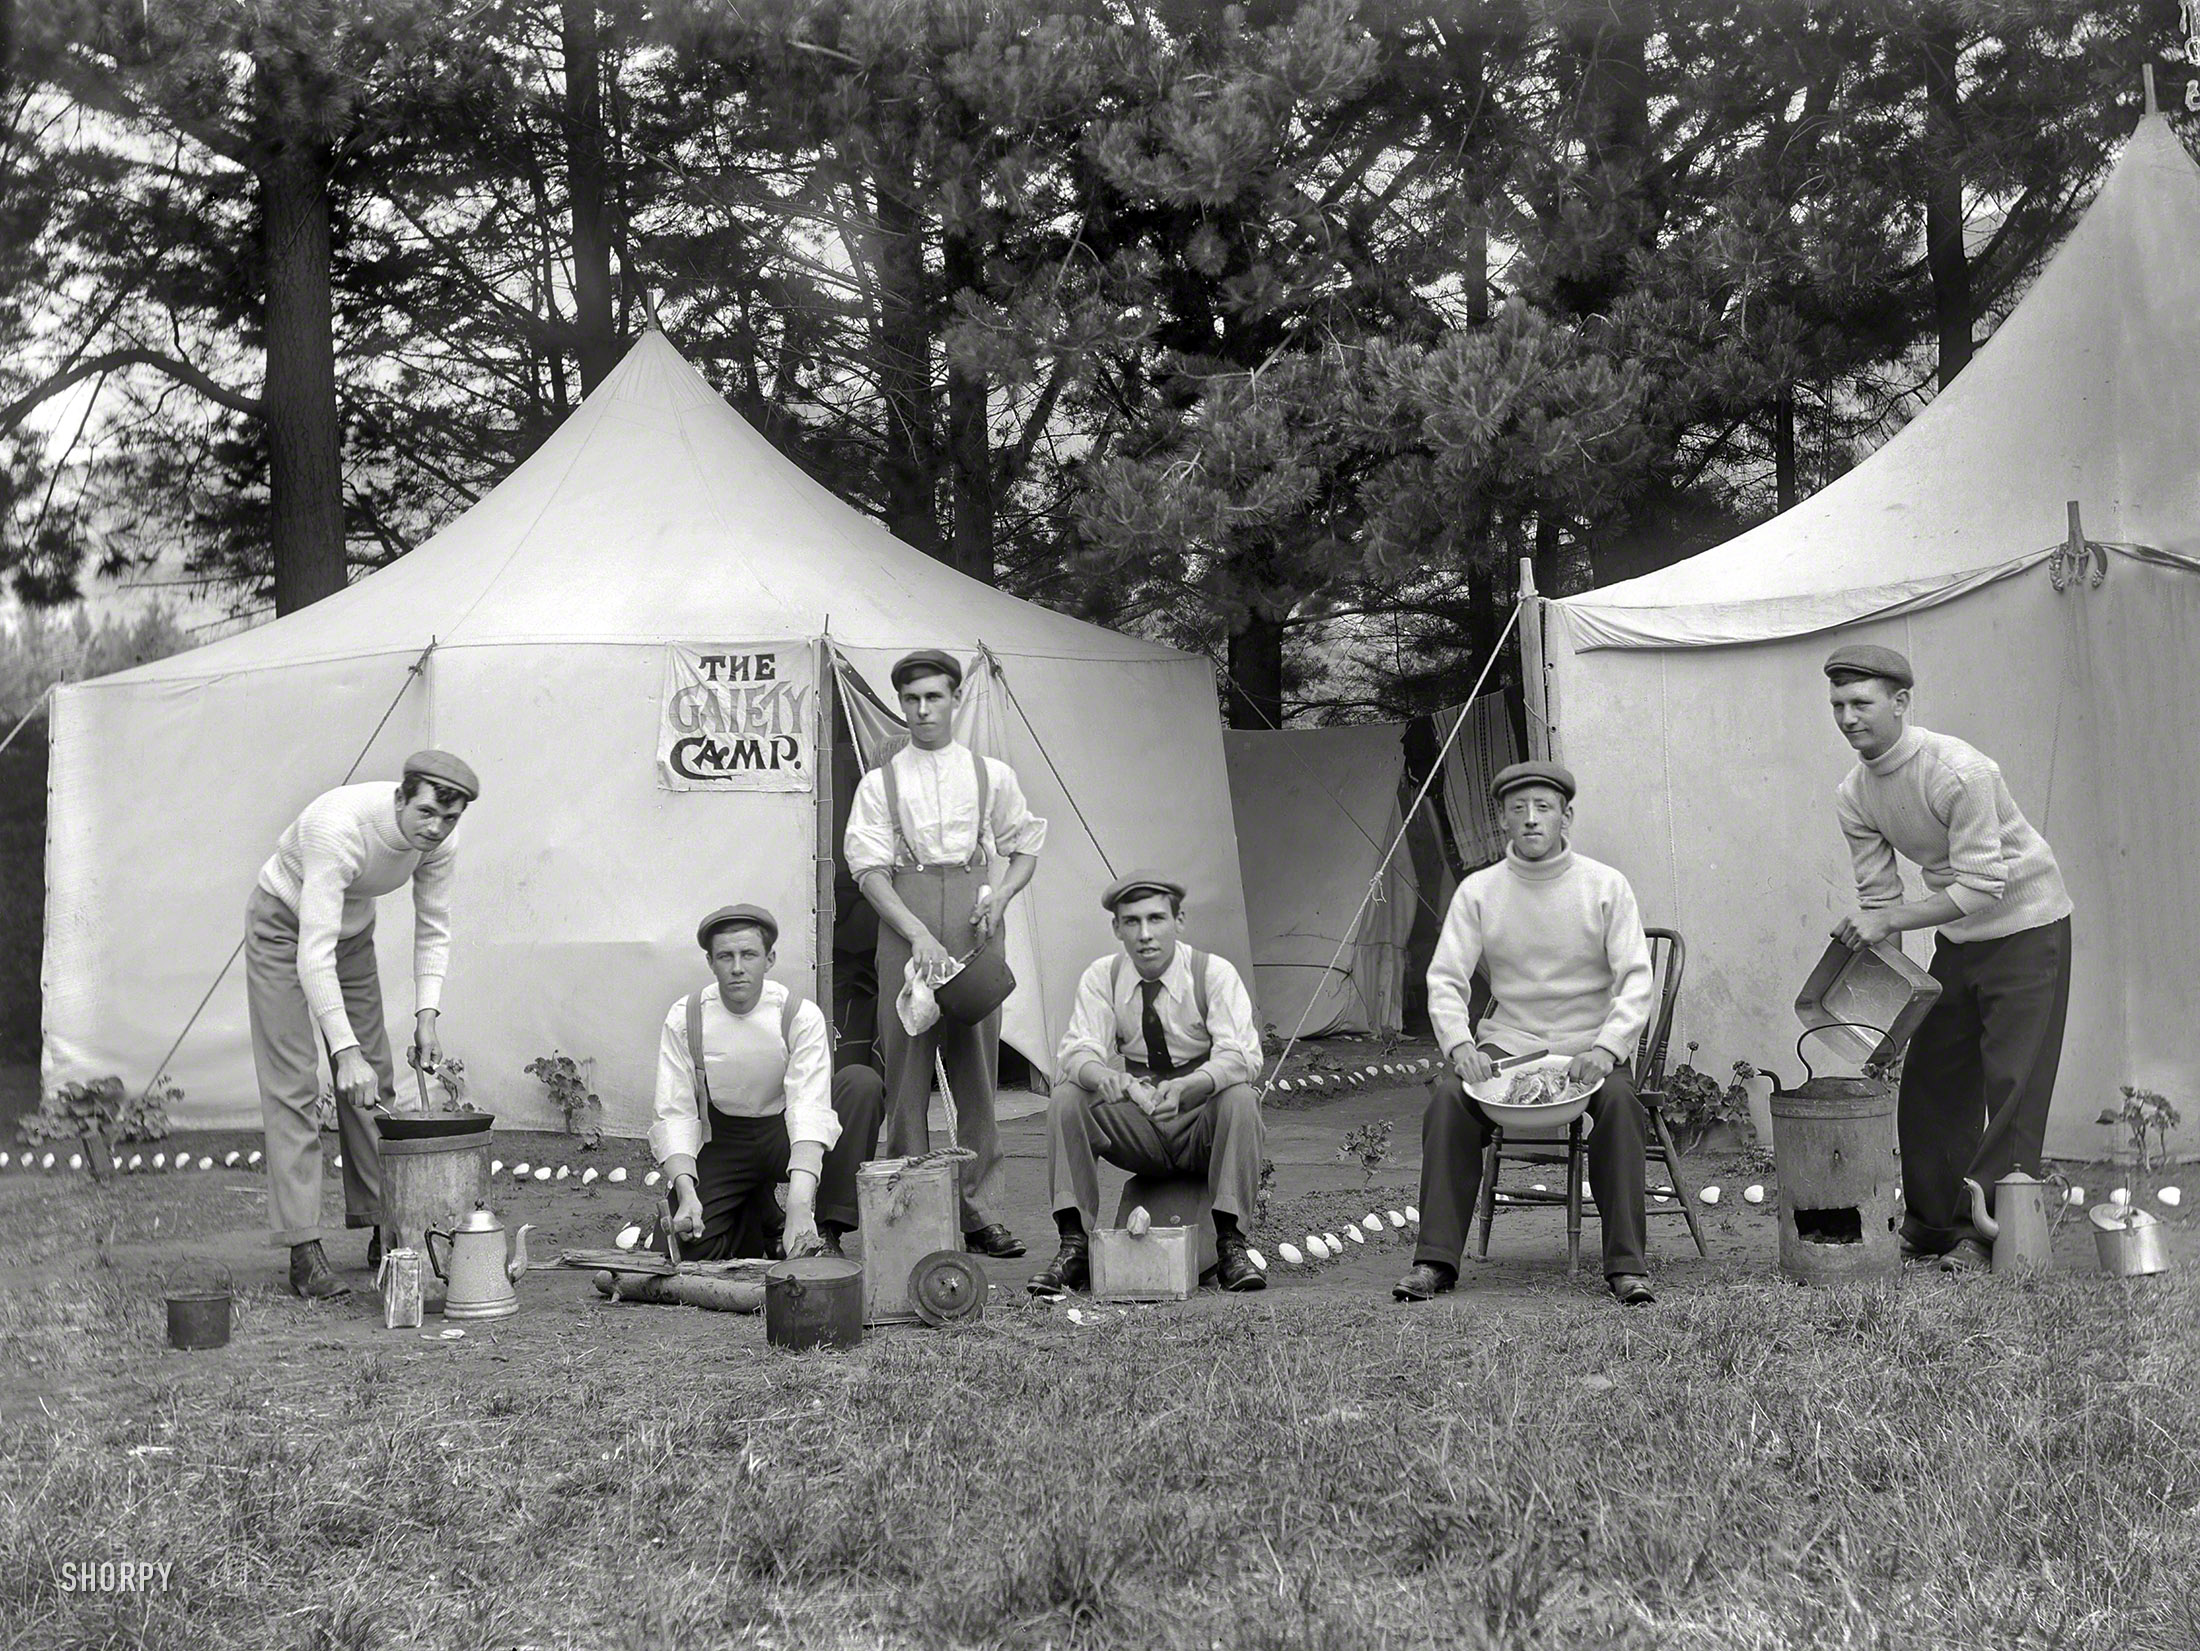 New Zealand circa 1910. "Group men outside a tent with a sign reading 'The Gaiety Camp,' showing each man performing domestic duties. Probably Christchurch district." It would be interesting to know something about the history of these elaborate camps (note the geranium flower beds), and how long the custom lasted. Photo by Adam Maclay, who made hundreds of these portraits. View full size.